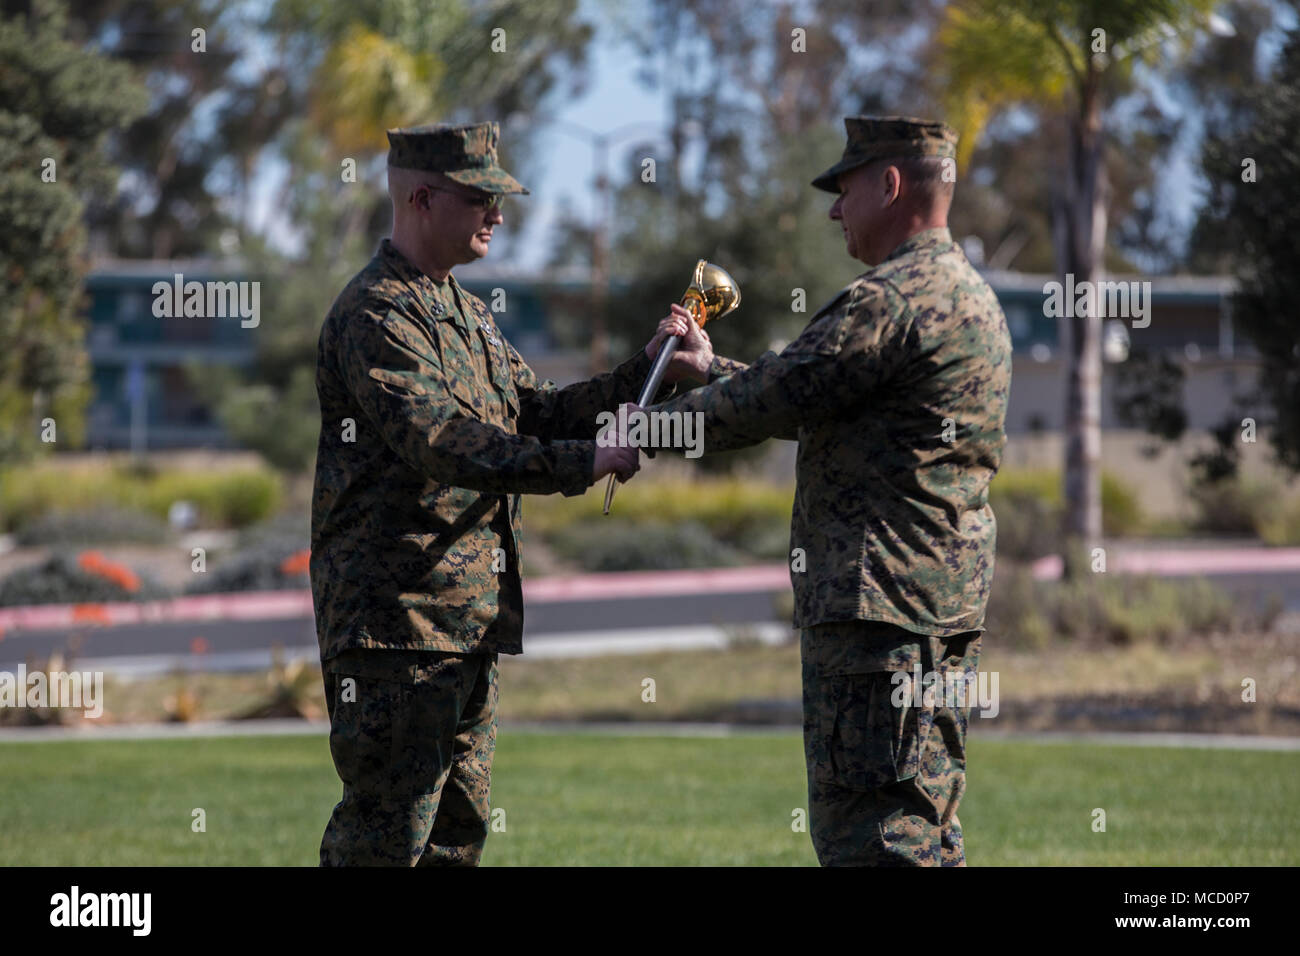 U.S. Marine Brig. Gen. Stephen Sklenka, the commanding general for the 1st Marine Logistics Group, passed the petty officer’s cutlass to Master Chief Petty Officer Zachary Pryor, command master chief for the 1st MLG, during his appointment ceremony at Camp Pendleton, Calif., Feb. 13, 2018. The last U.S. Navy cutlass manufactured was the Model 1917, made in 1917, until they were declared obsolete in 1949. (U.S. Marine Corps photo by Cpl. Adam Dublinske) Stock Photo